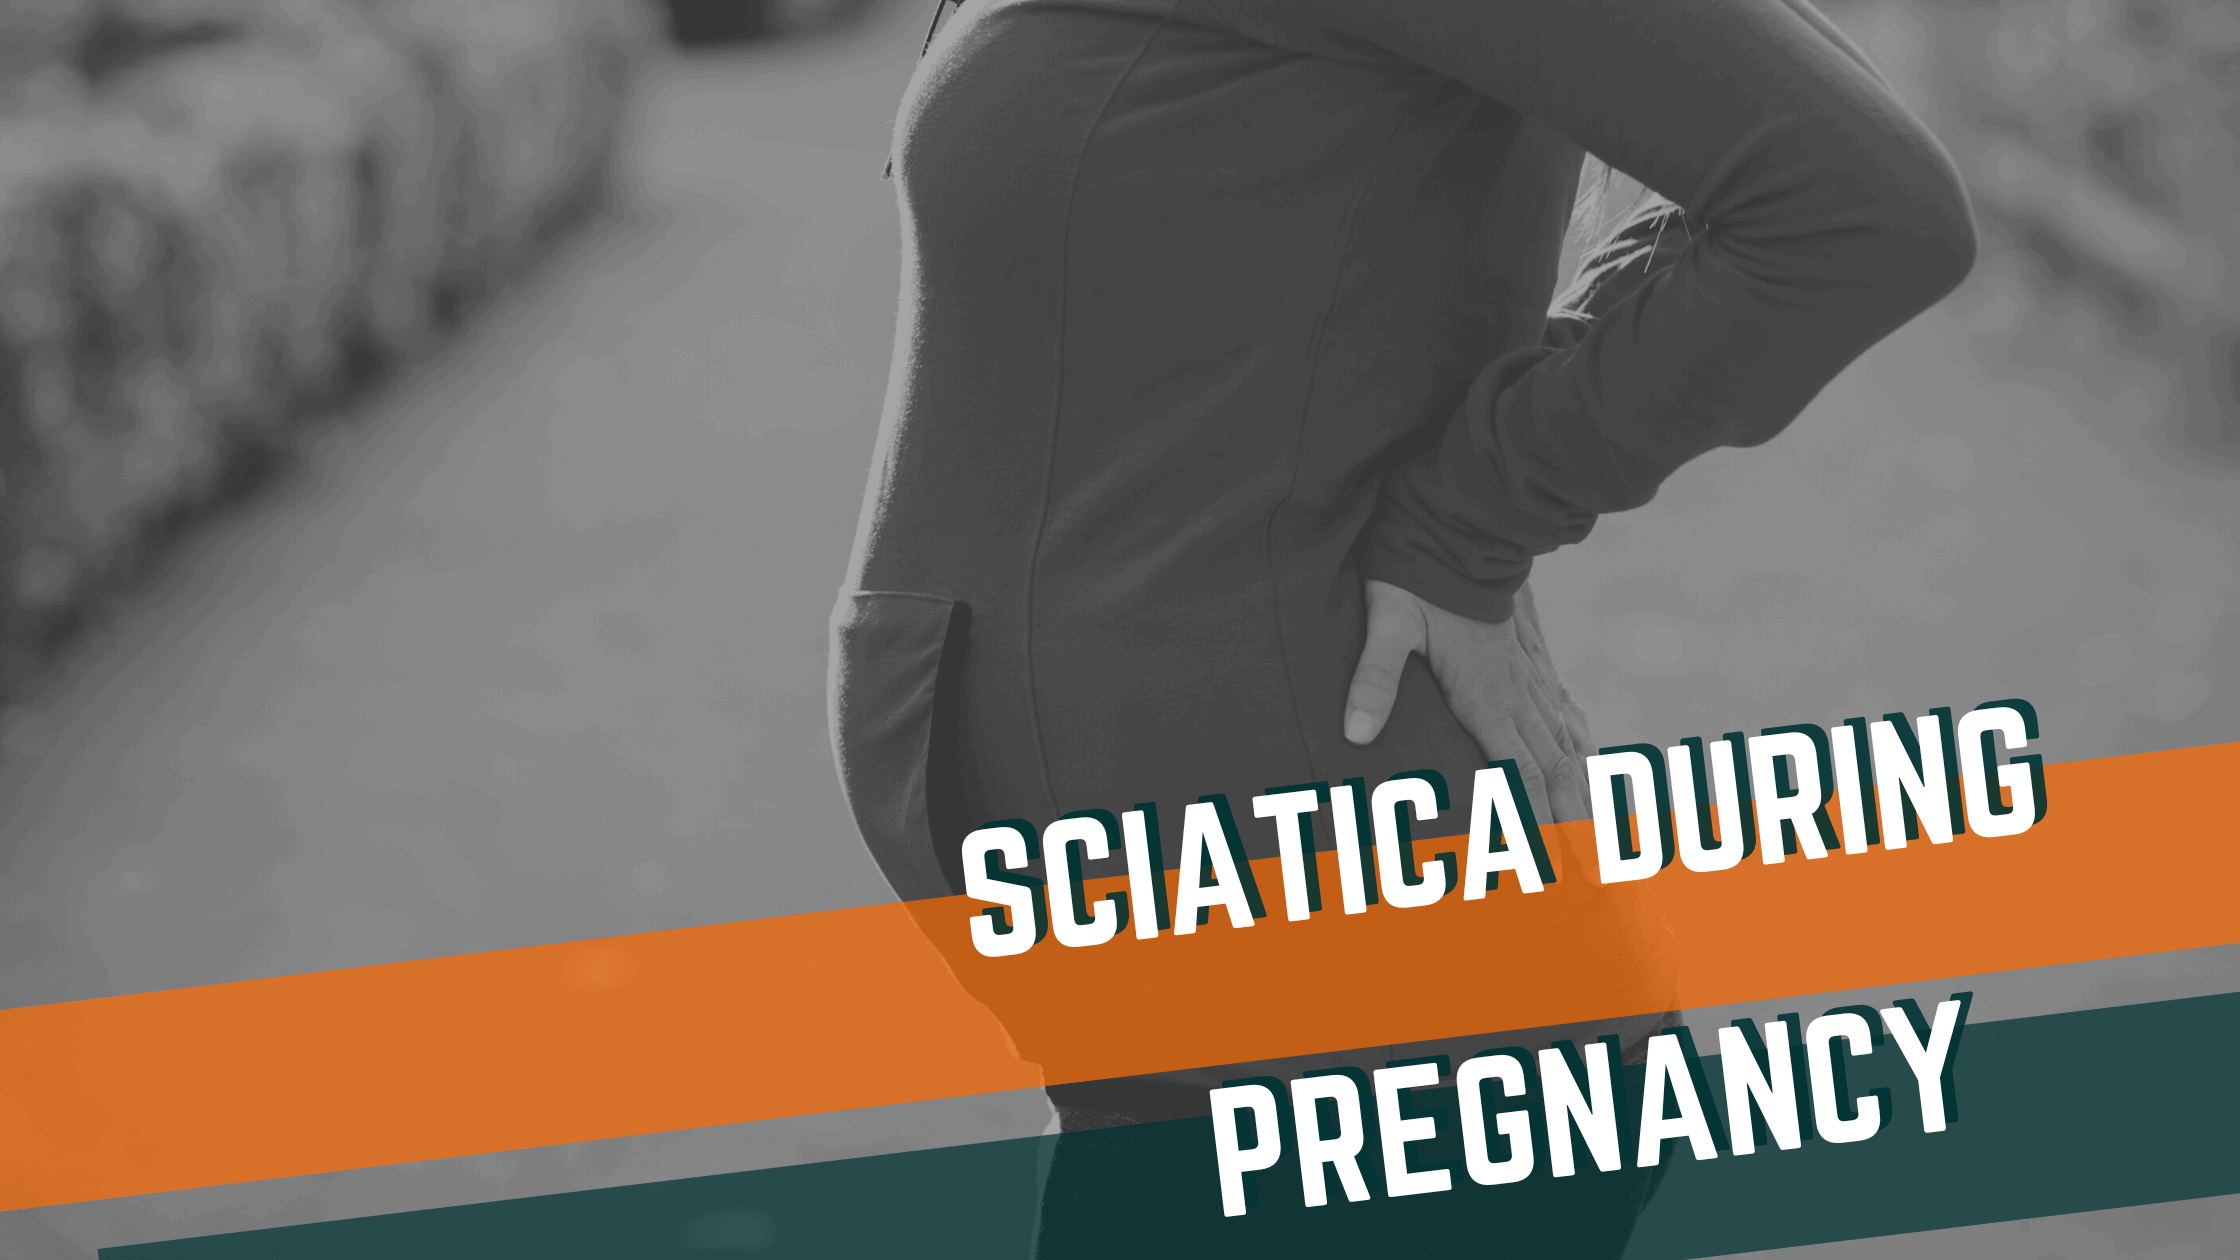 Featured image for “Sciatica During Pregnancy”